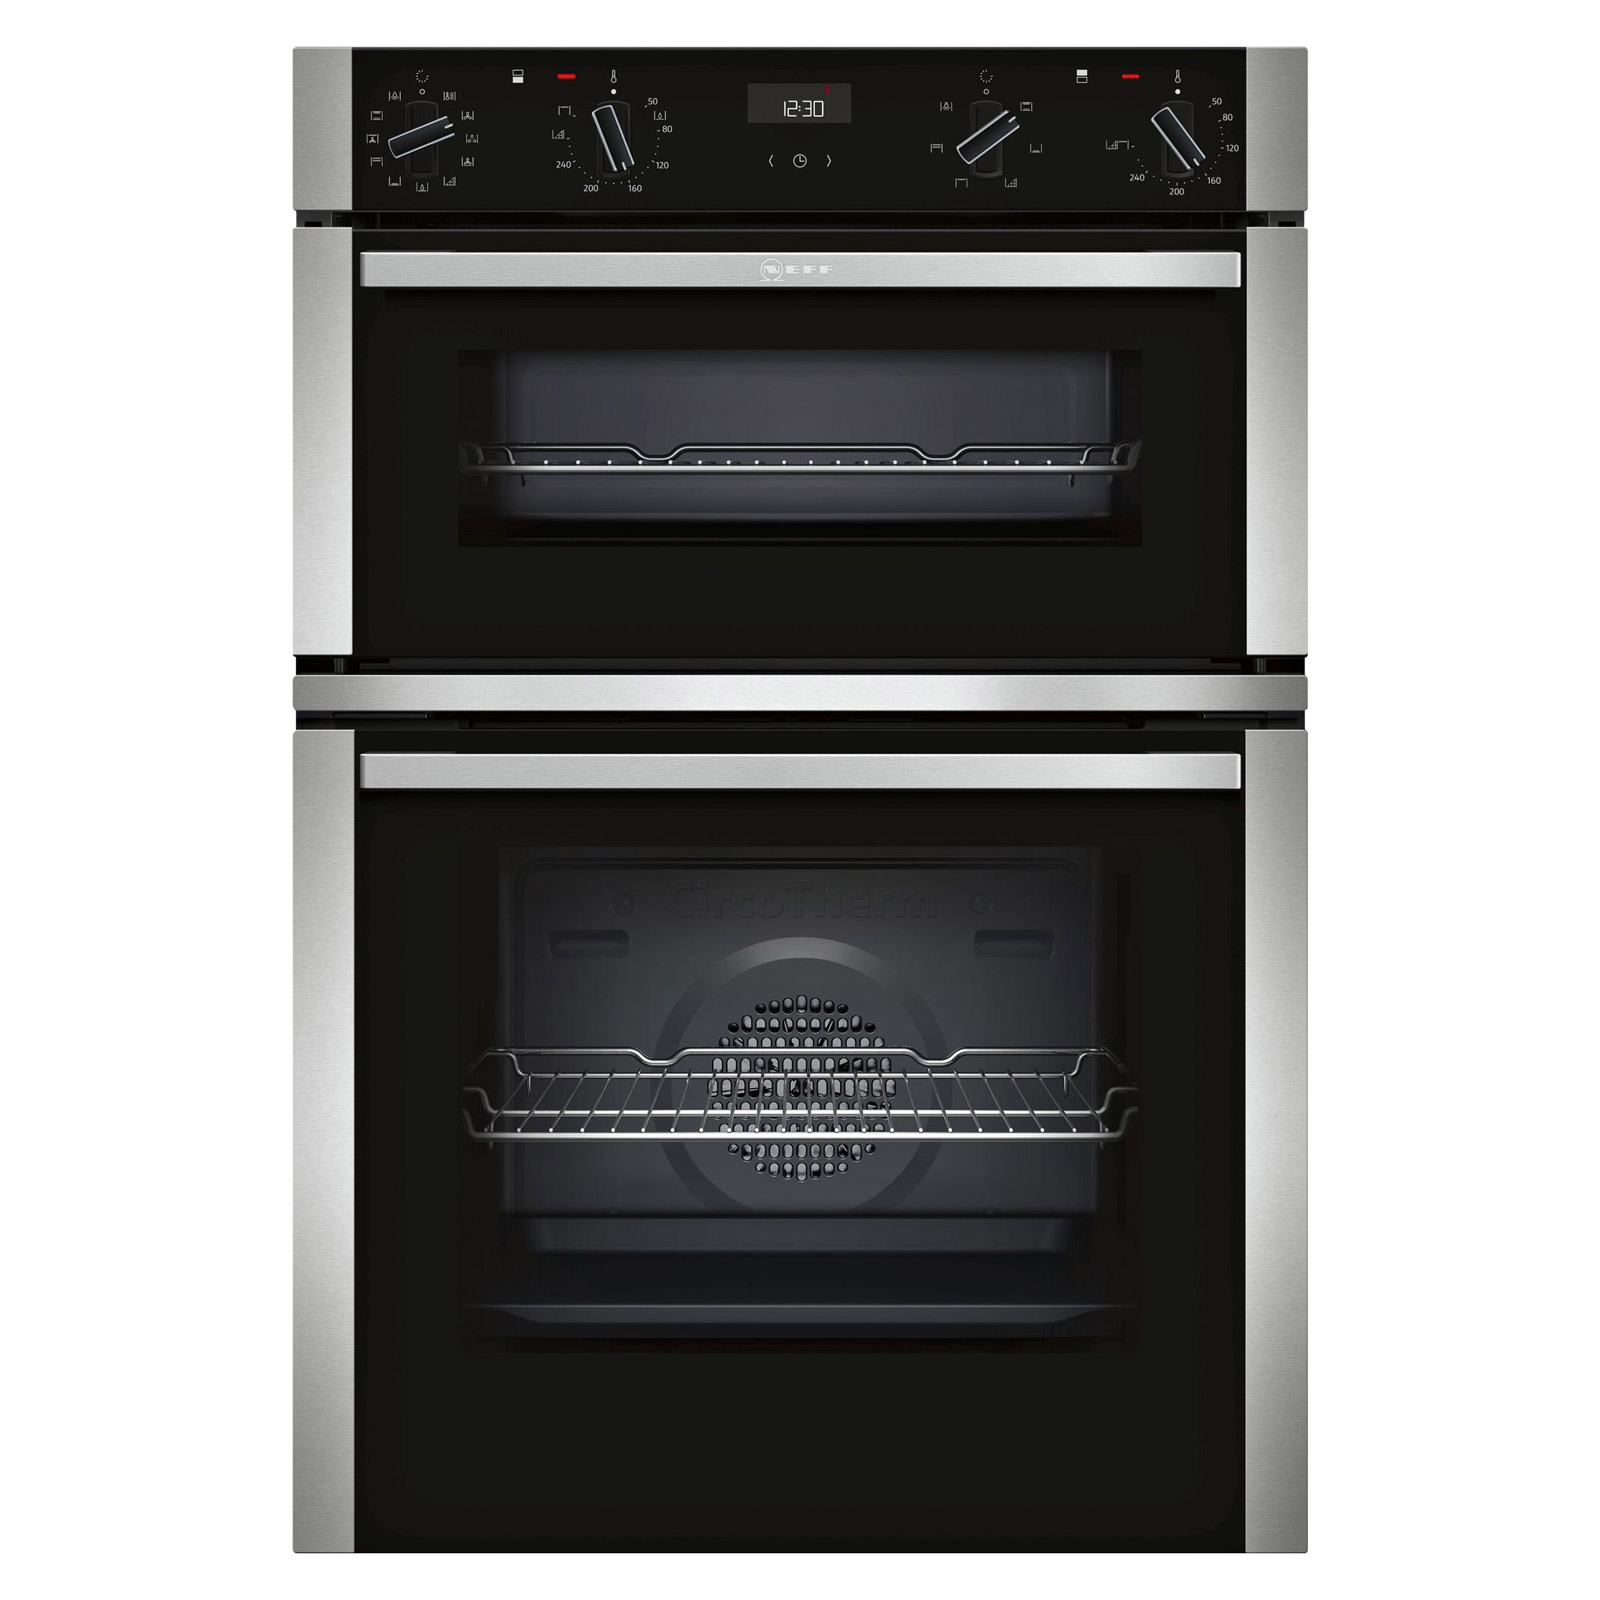 Image of Neff U1ACI5HN0B N50 Built In CircoTherm Plus Double Oven Black St Stee